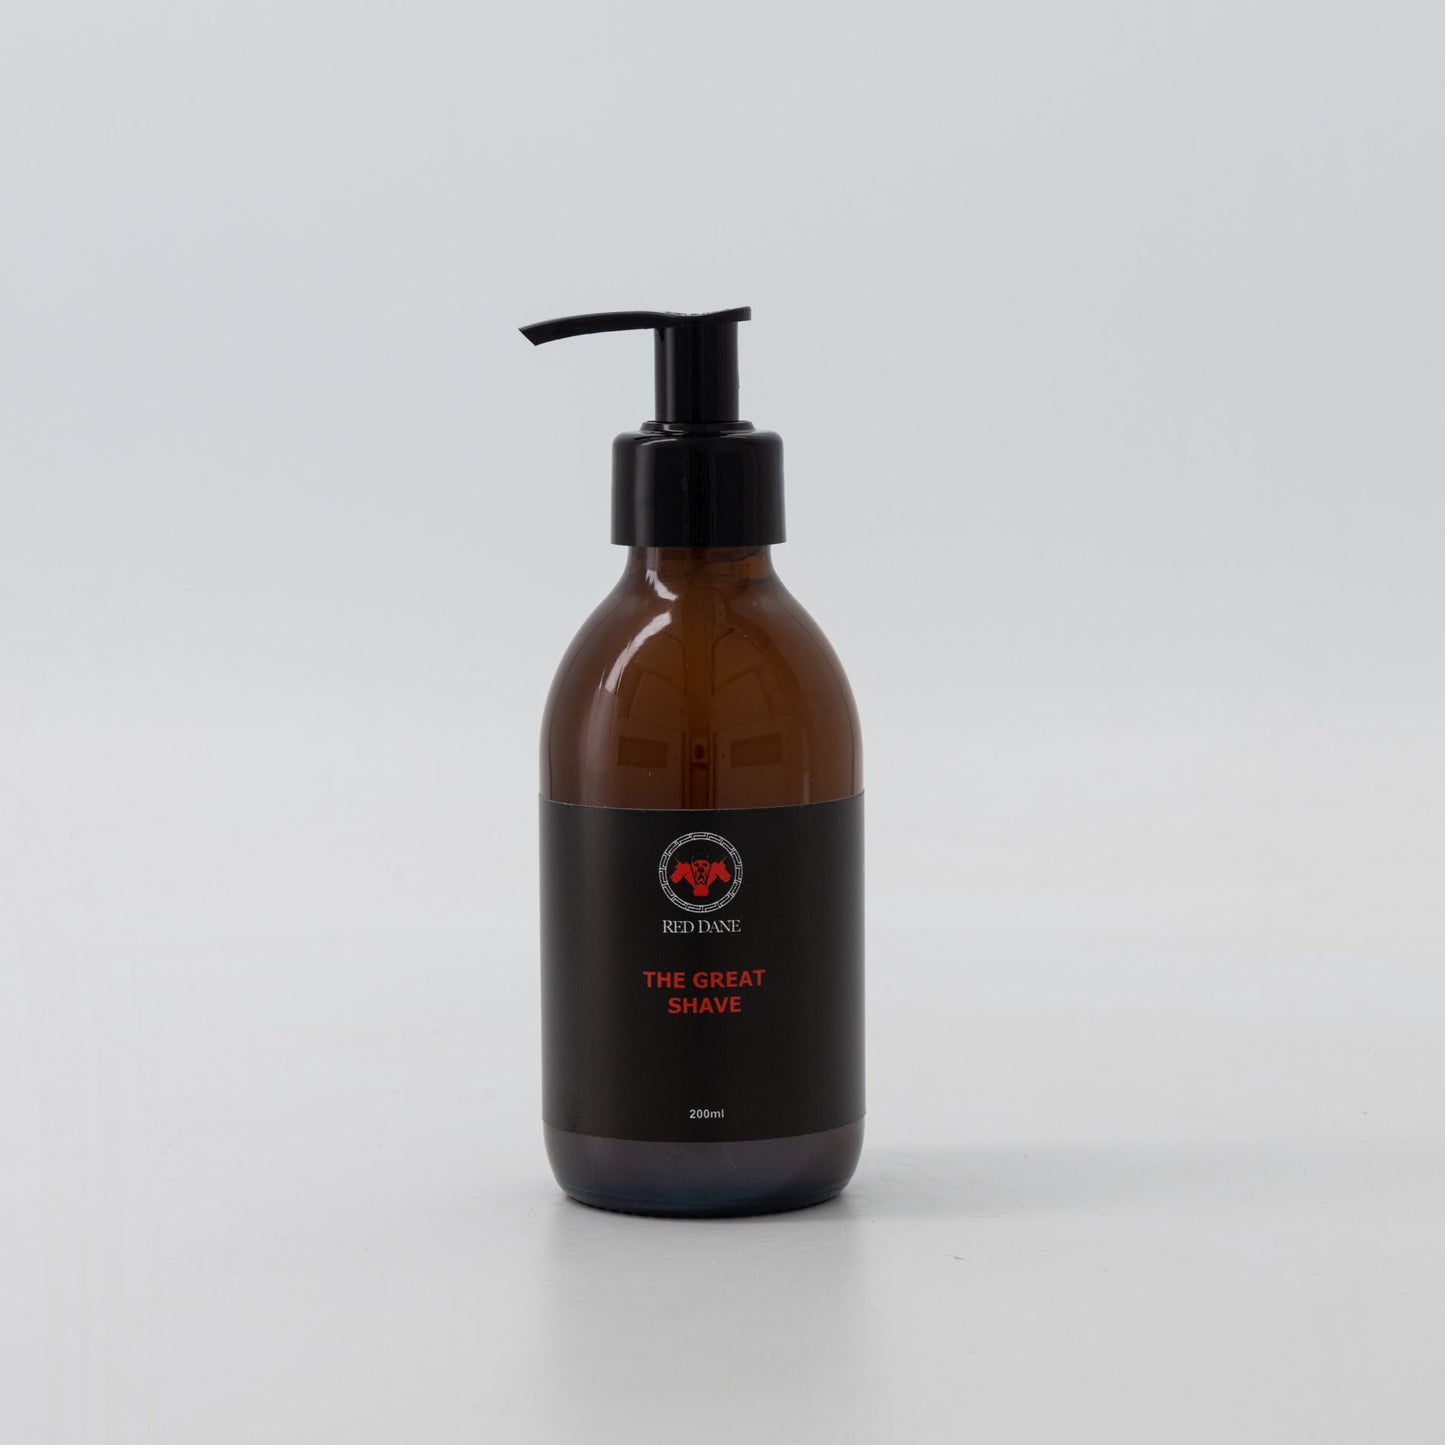 THE GREAT SHAVE 200ml